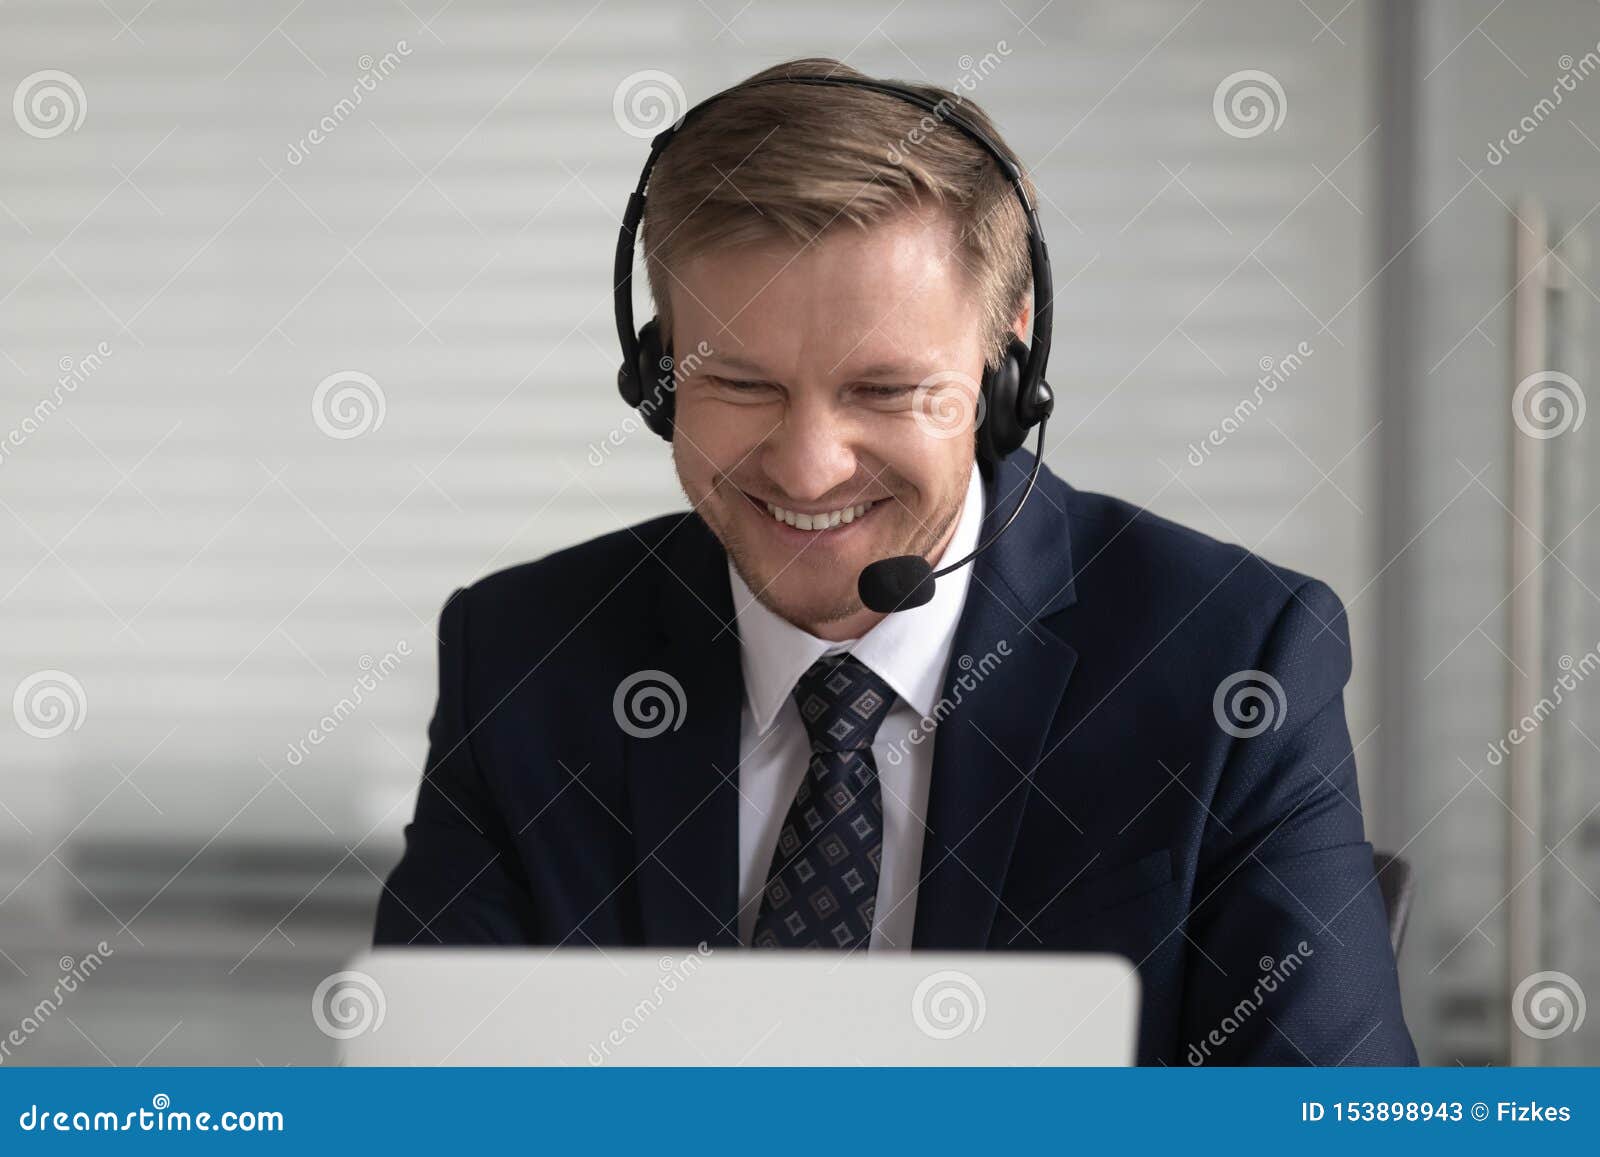 happy businessman wearing suit wireless headset make conference video call